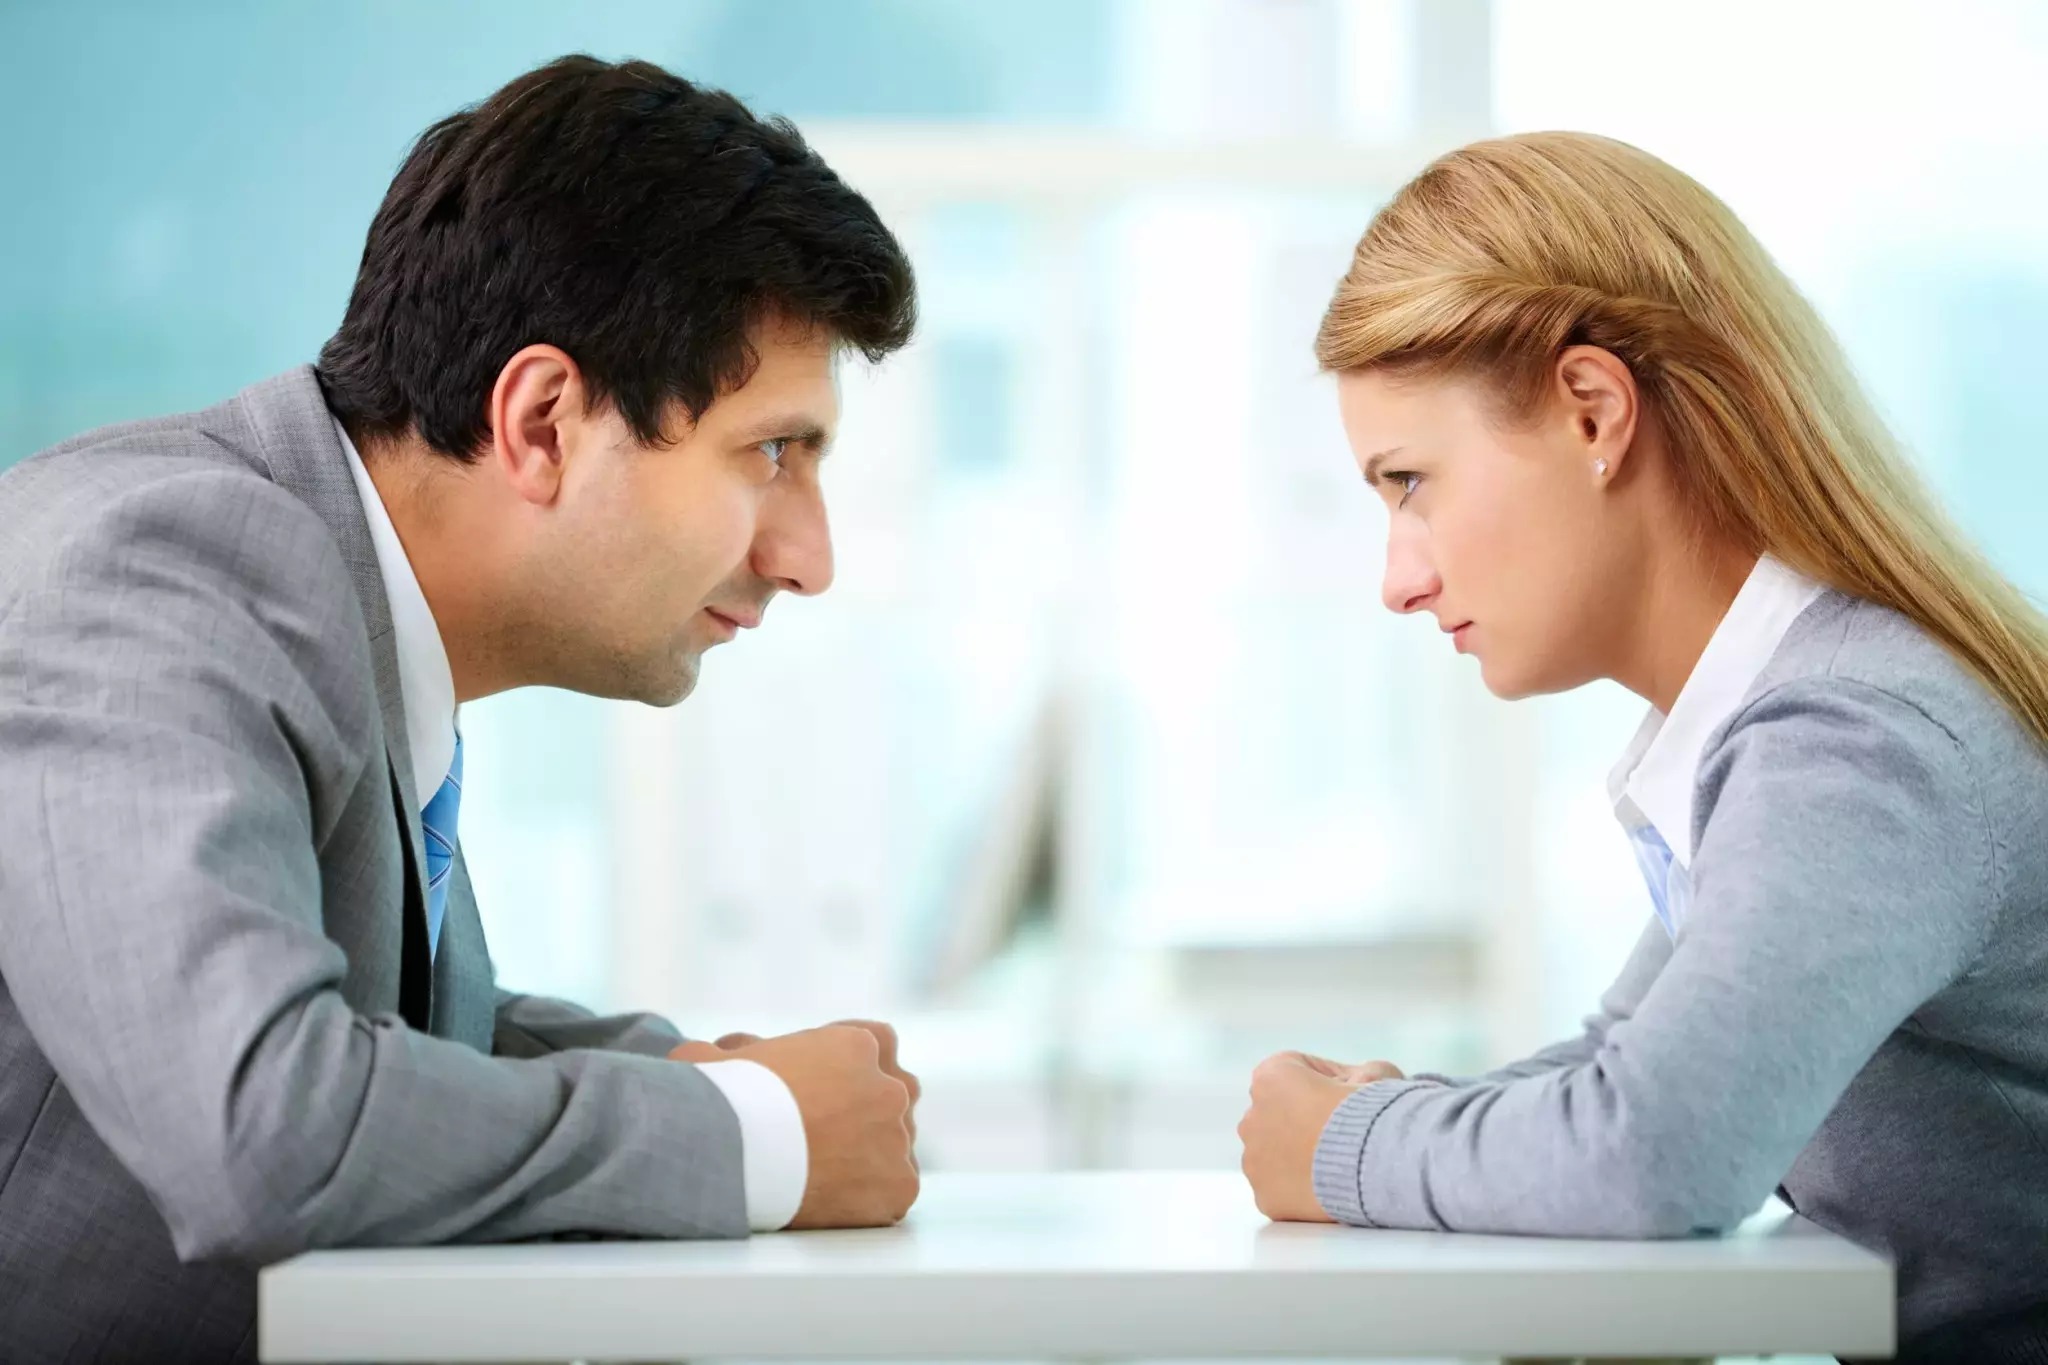 7 Effective Tips on How to Avoid Conflicts